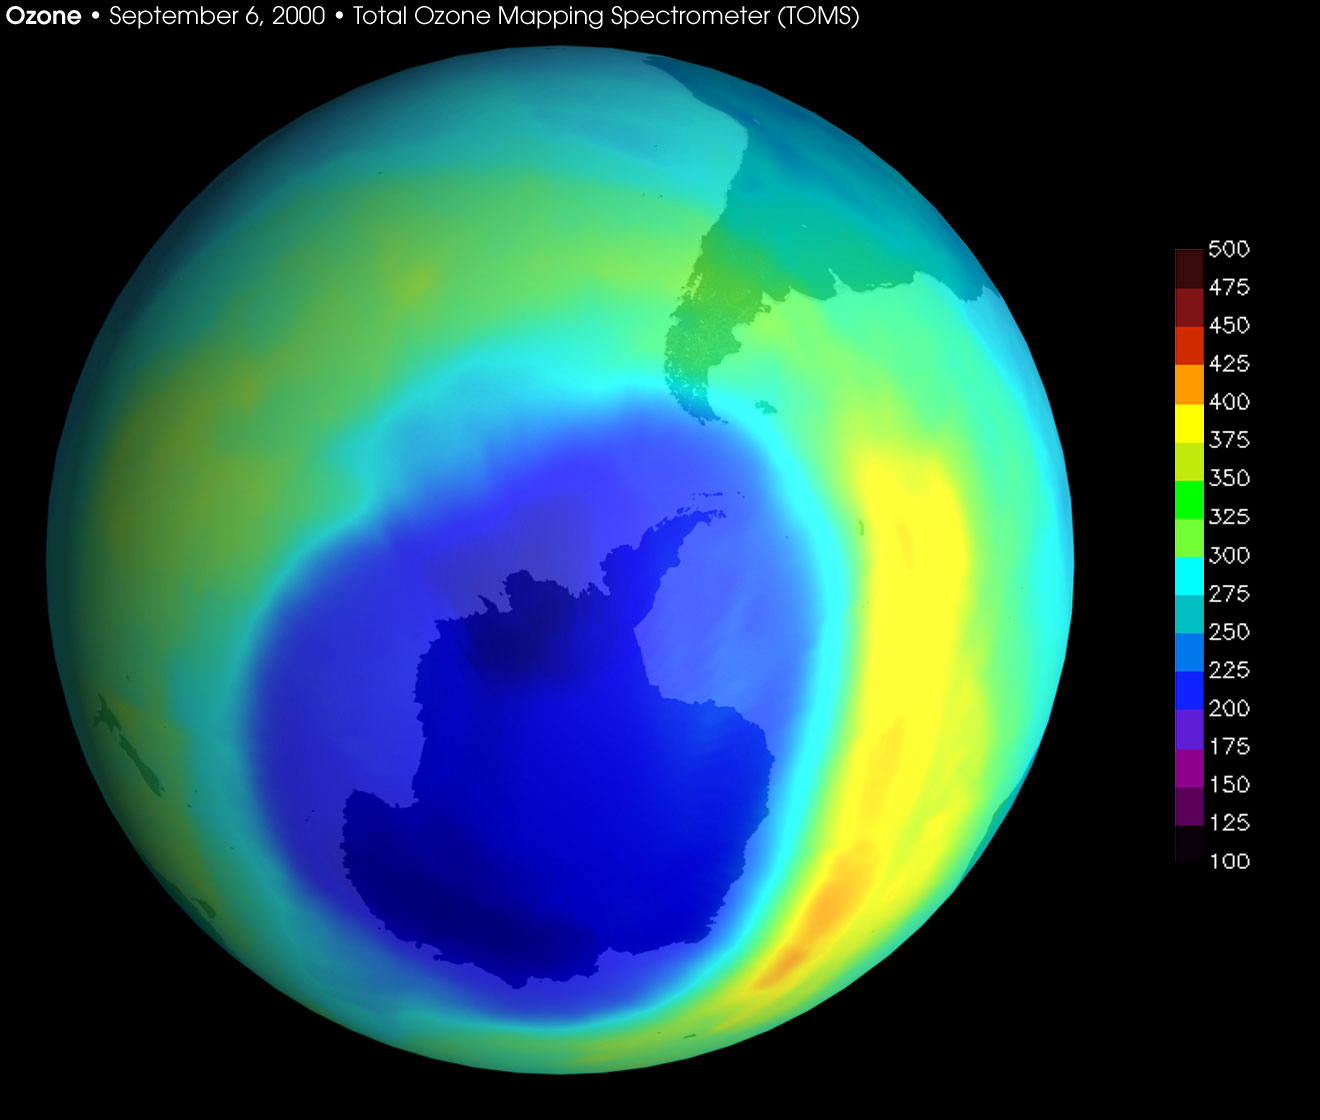 Image: Earth’s ozone hole rapidly shrinking following ban of ozone depleting chemicals